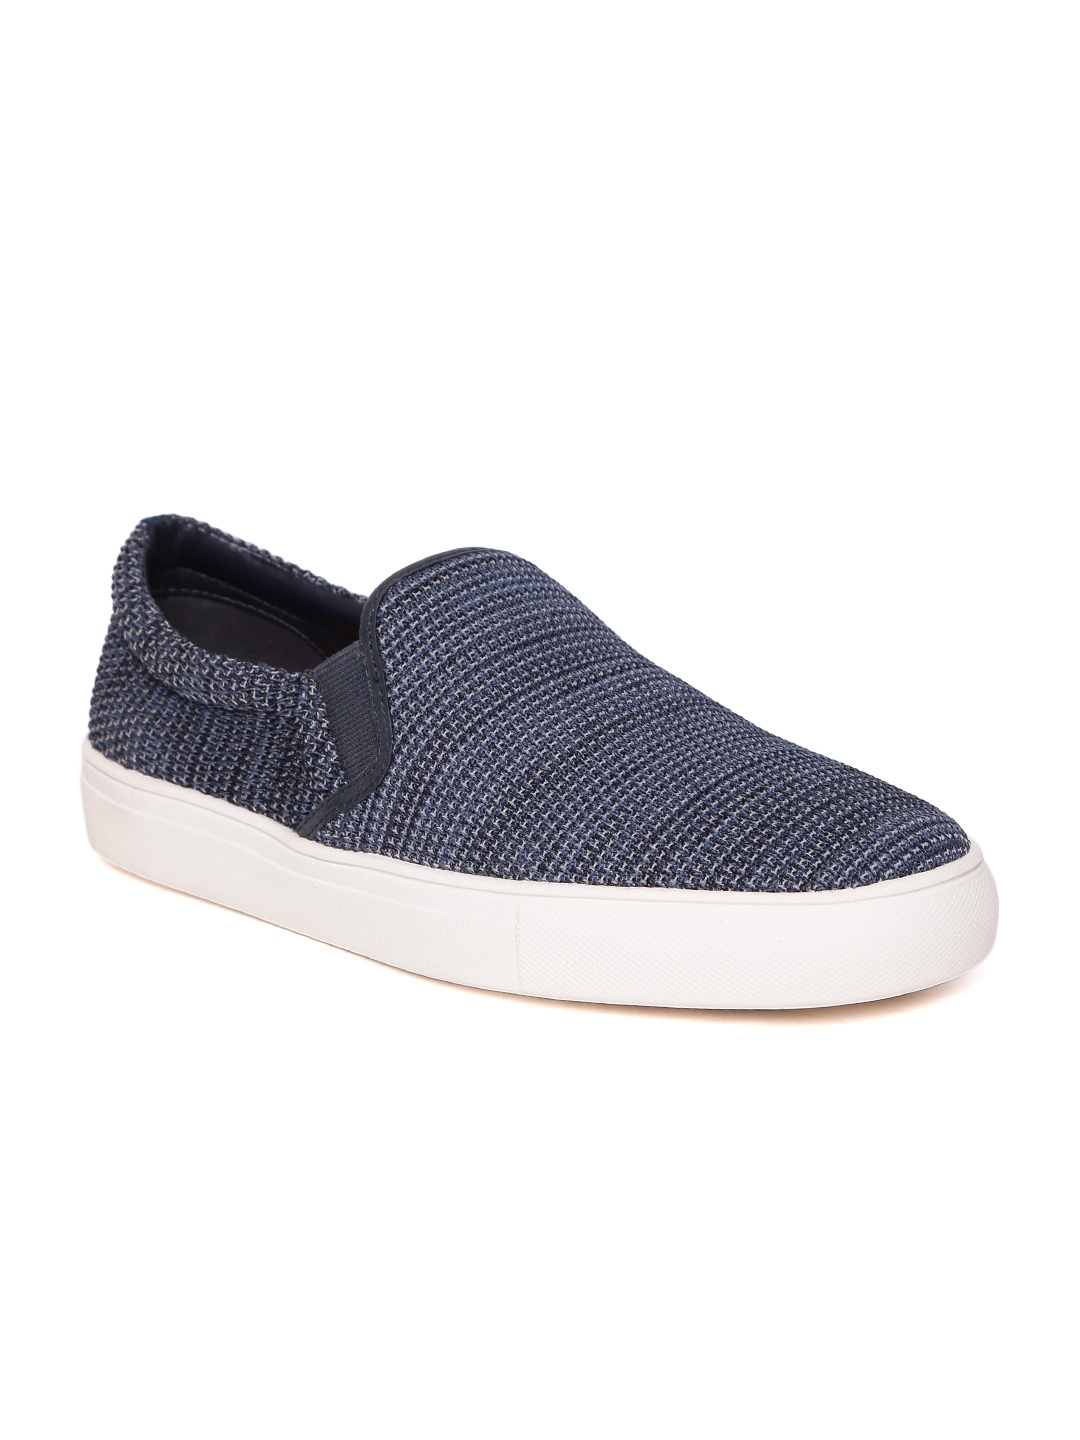 Buy Kenneth Cole Reaction Men Blue Patterned Slip On Sneakers - Casual ...